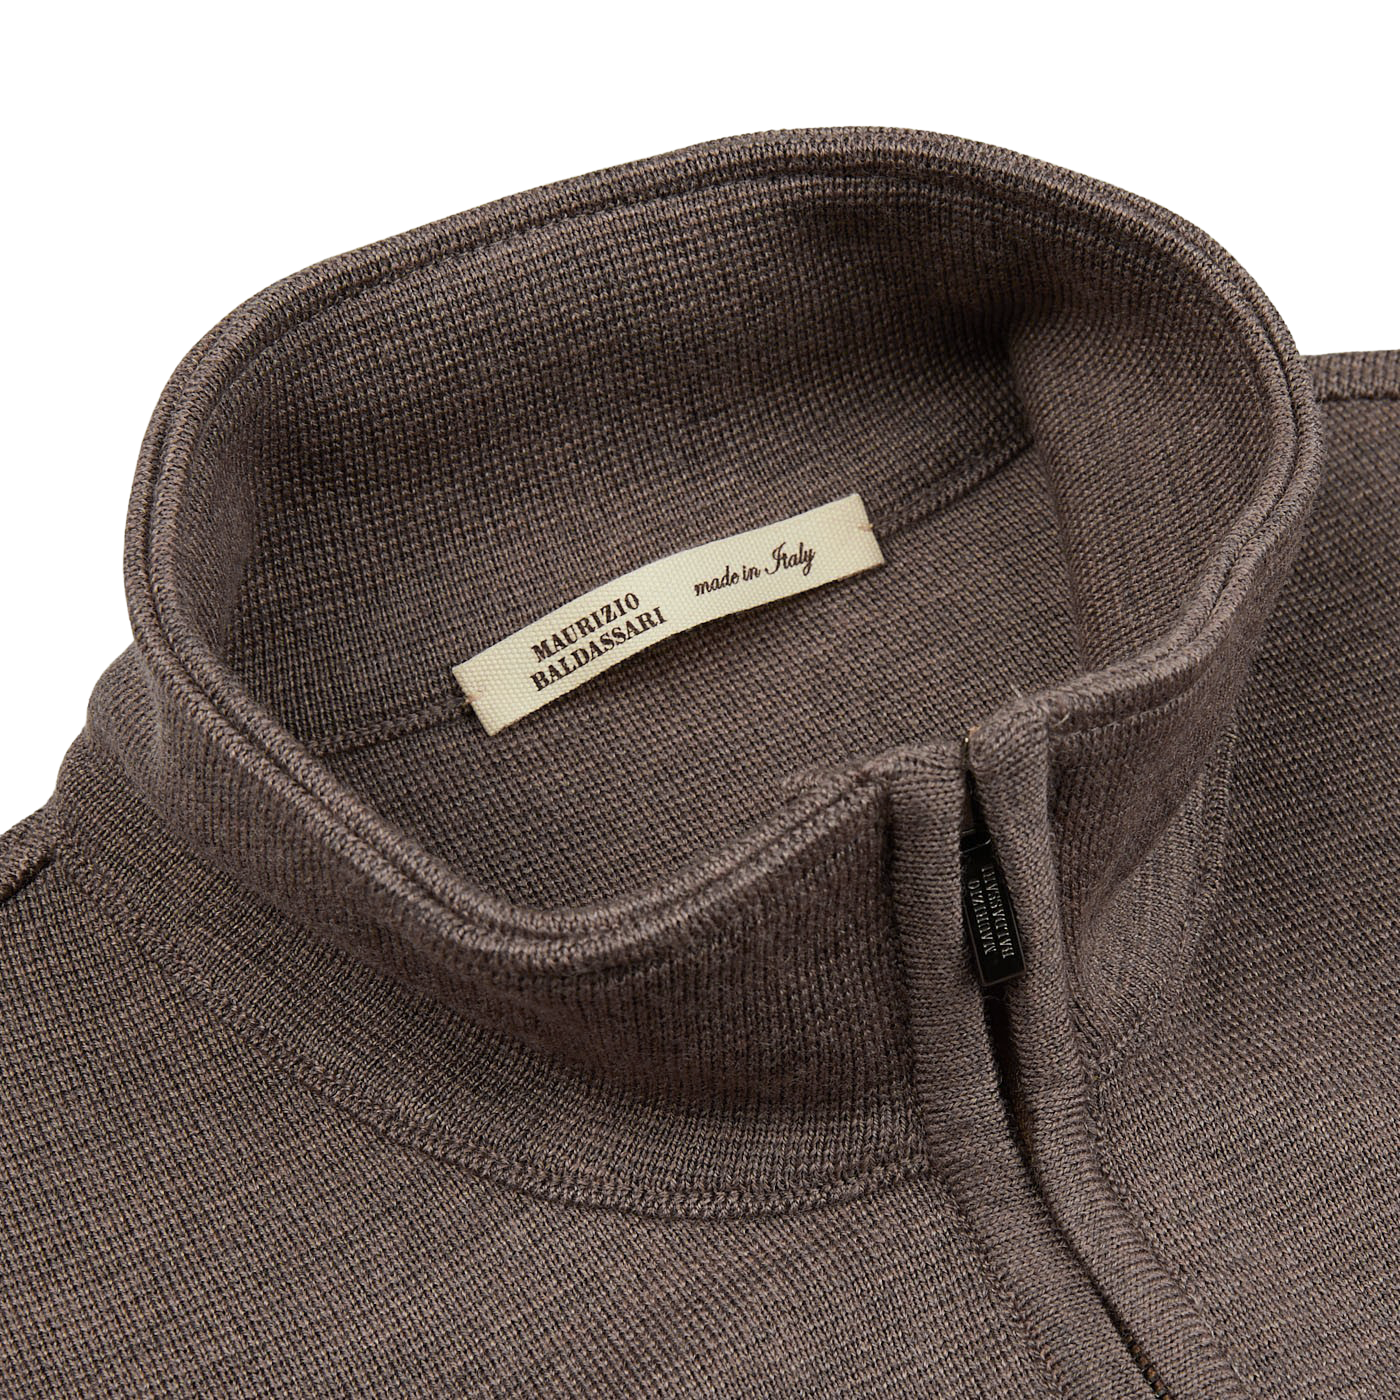 A close up of a Dark Beige Milano Stitch Wool Zip Gilet with a label on it, featuring the brand name "Maurizio Baldassari" and the keywords "Milano stitch".